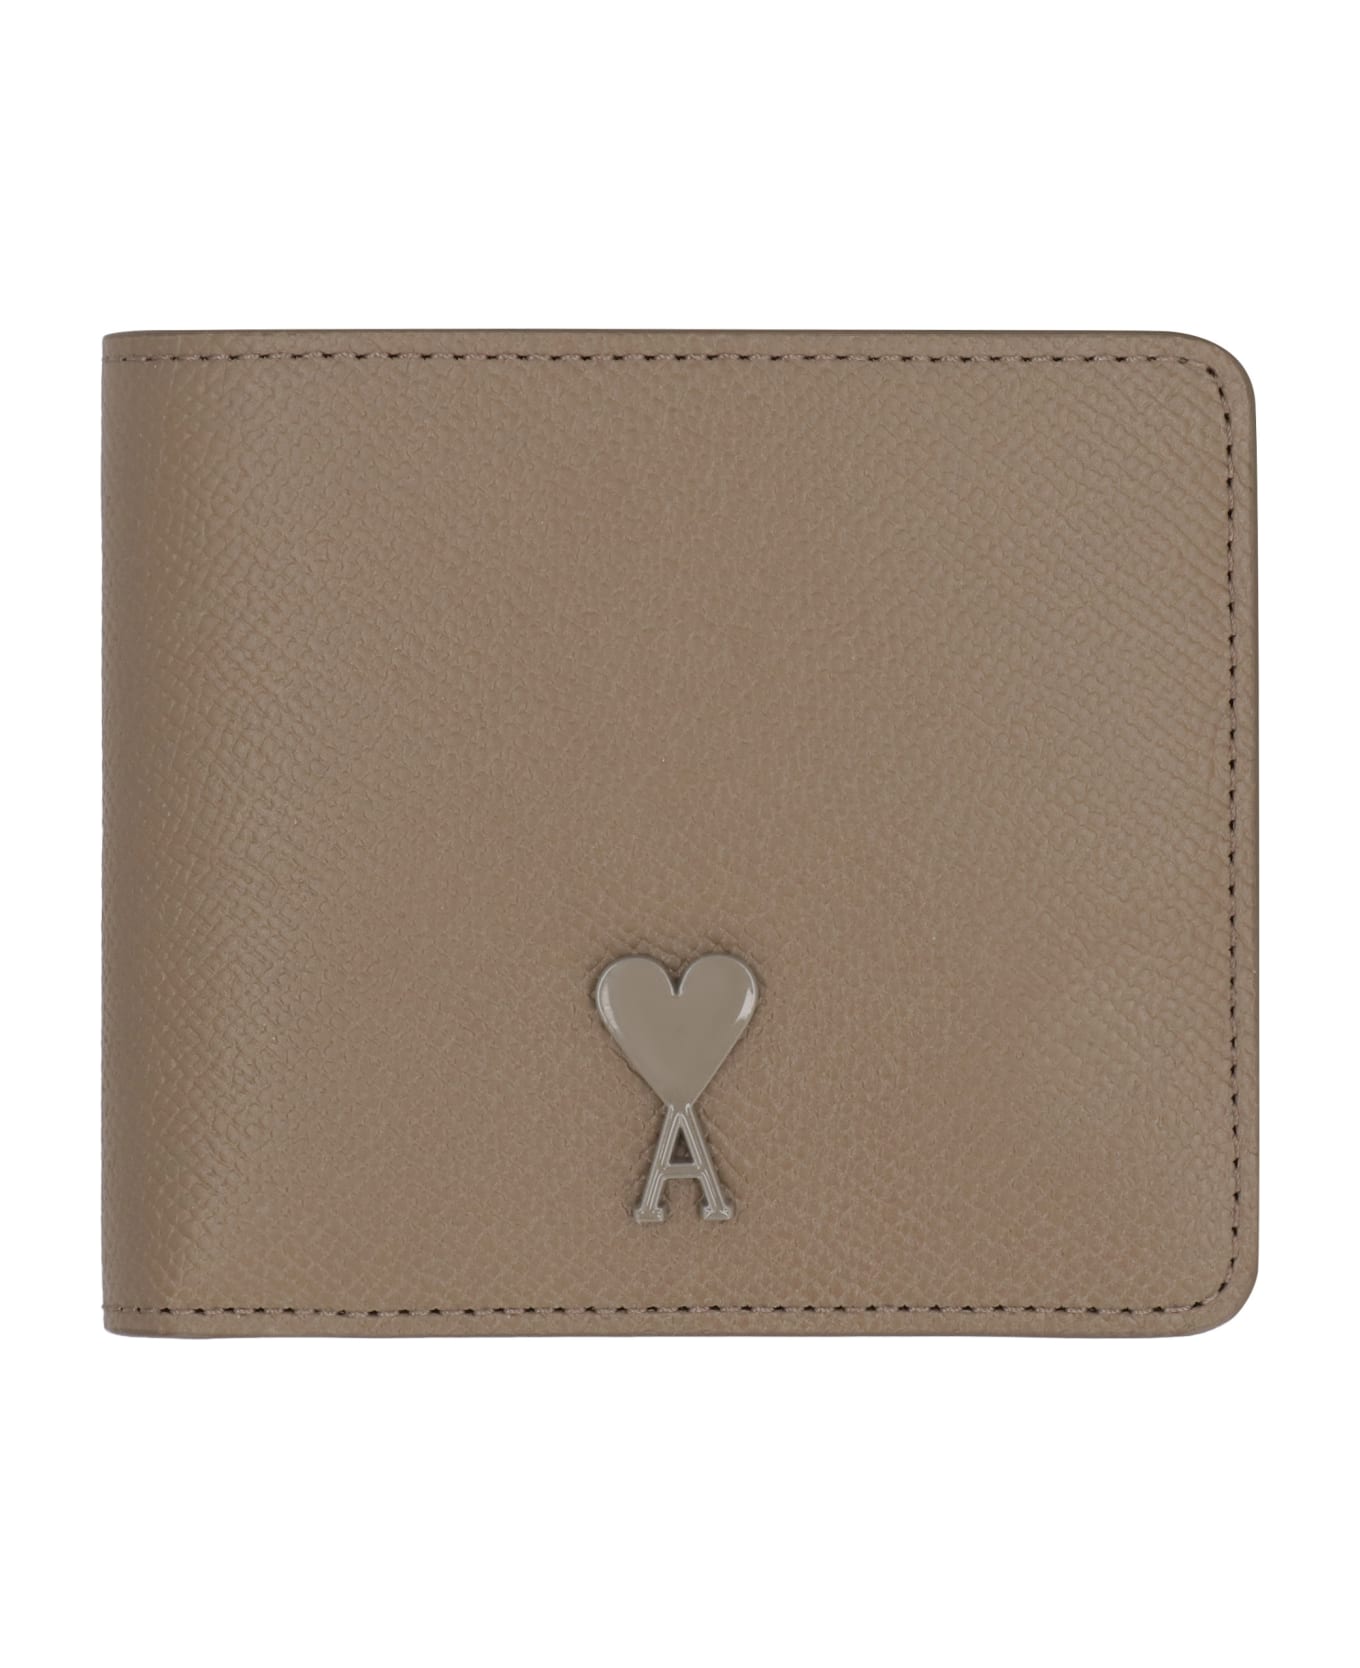 Ami Alexandre Mattiussi Leather Wallet - taupe